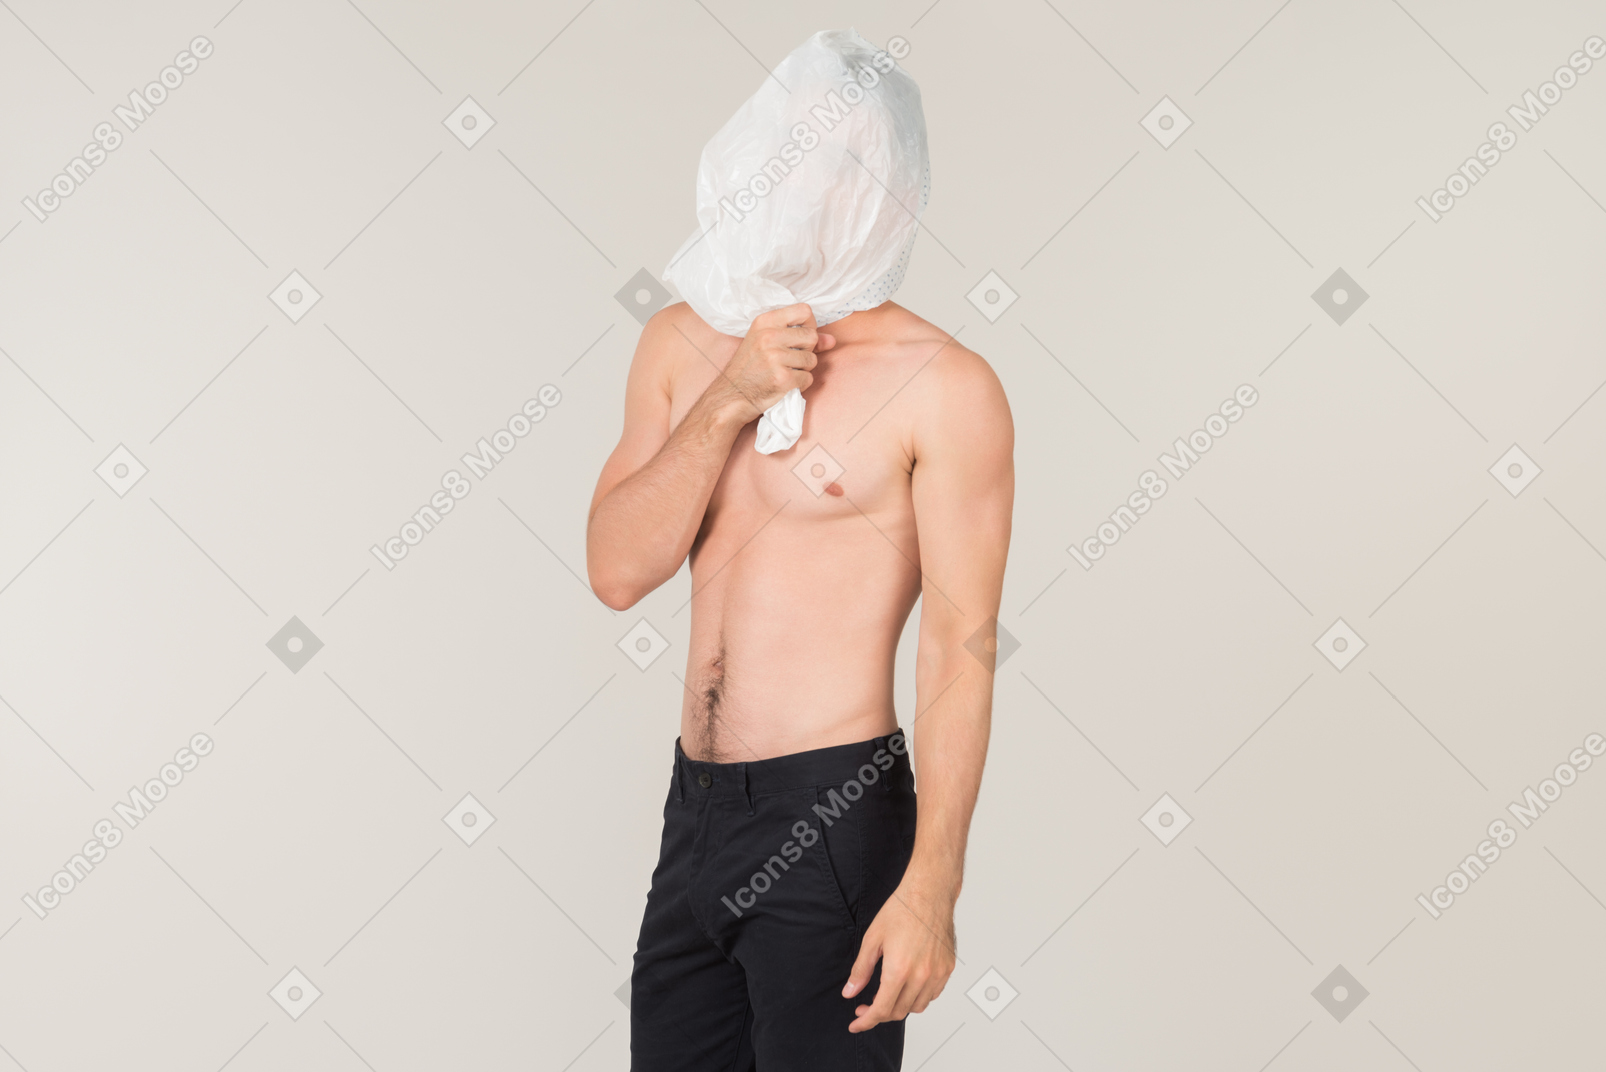 A fit young man with naked torso, putting a white plastic bag on his head